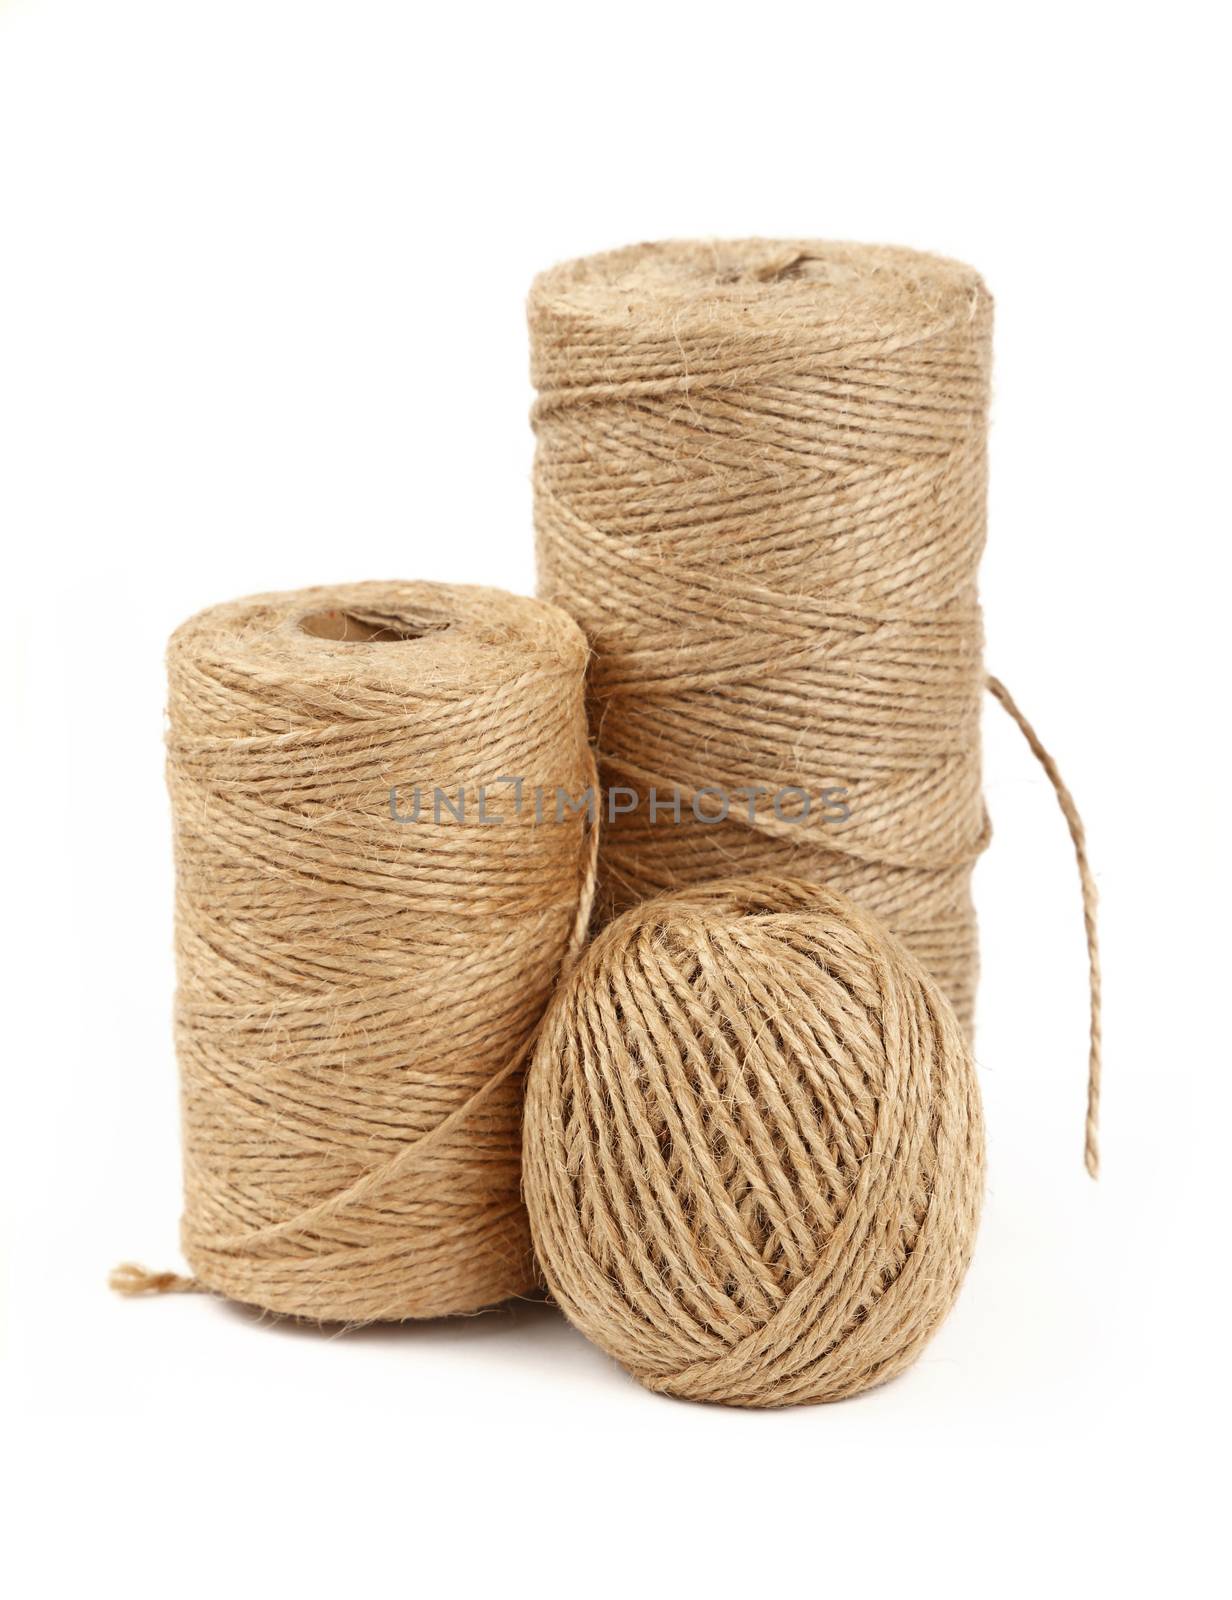 Group of three different coil bobbin of natural brown twine hessian burlap jute rope over white background, close up, high angle side view